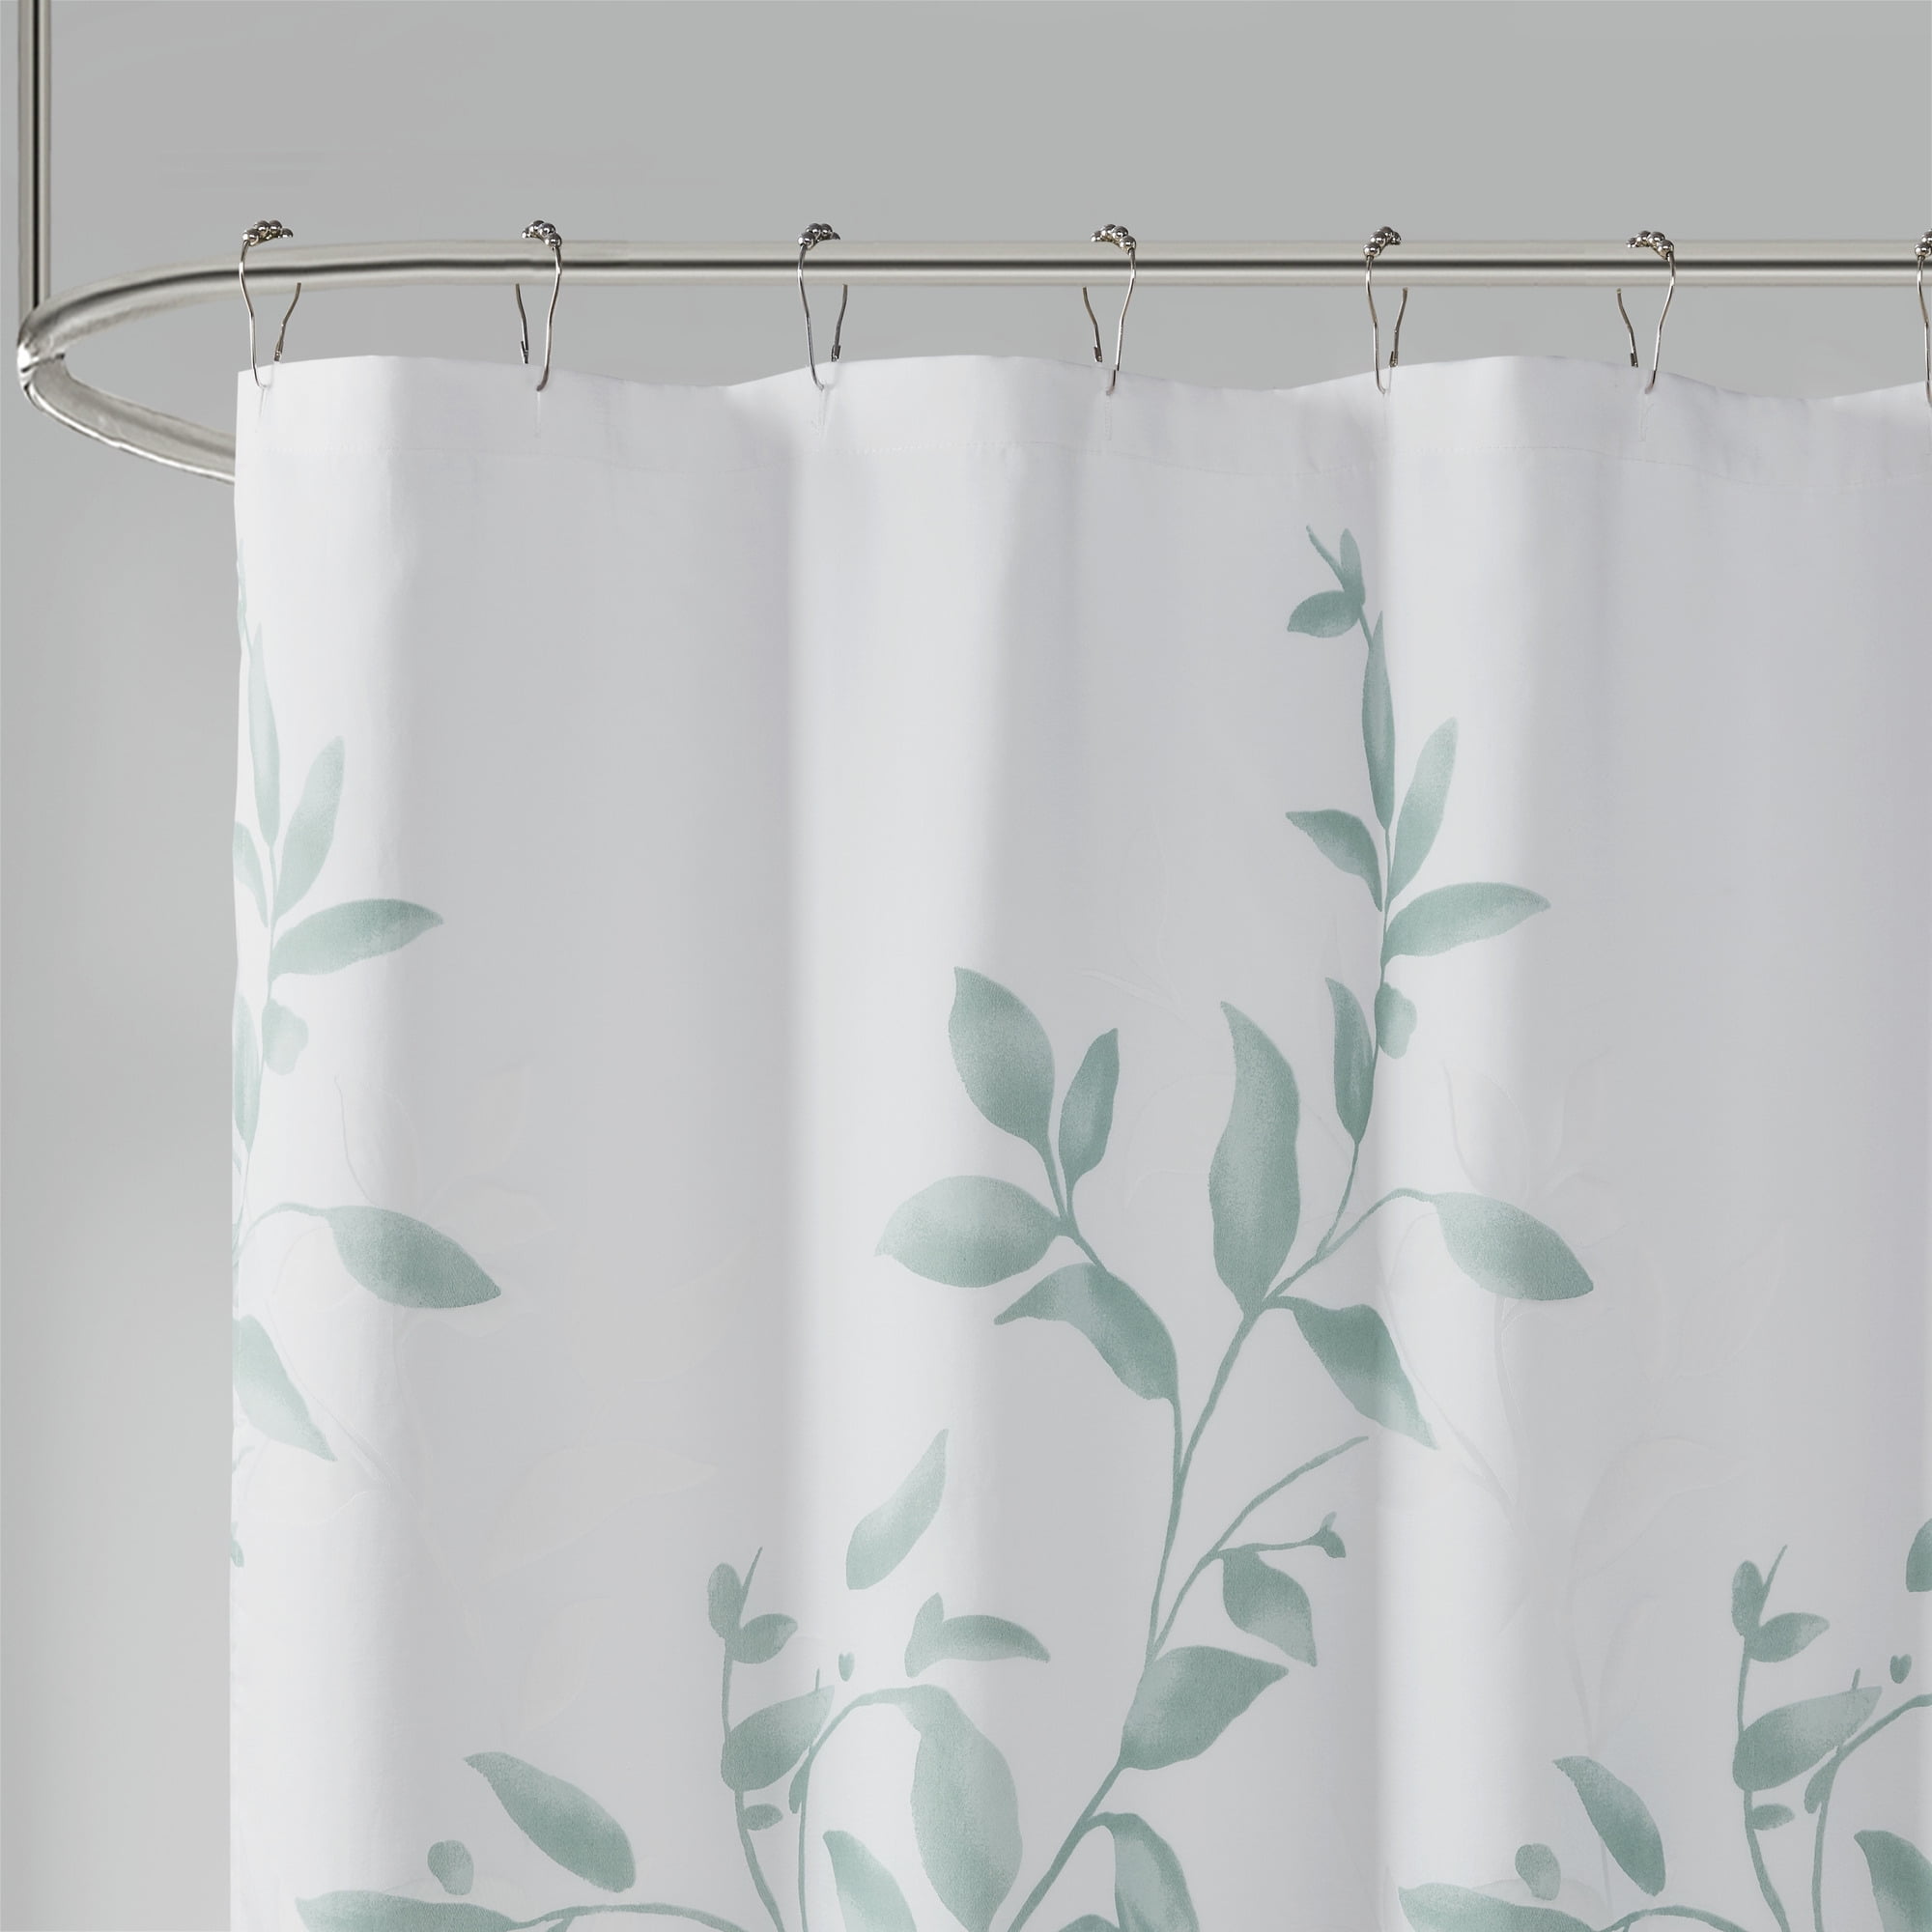 KRISIN Shower curtains for bathrooms, Sparkling waves, sea level